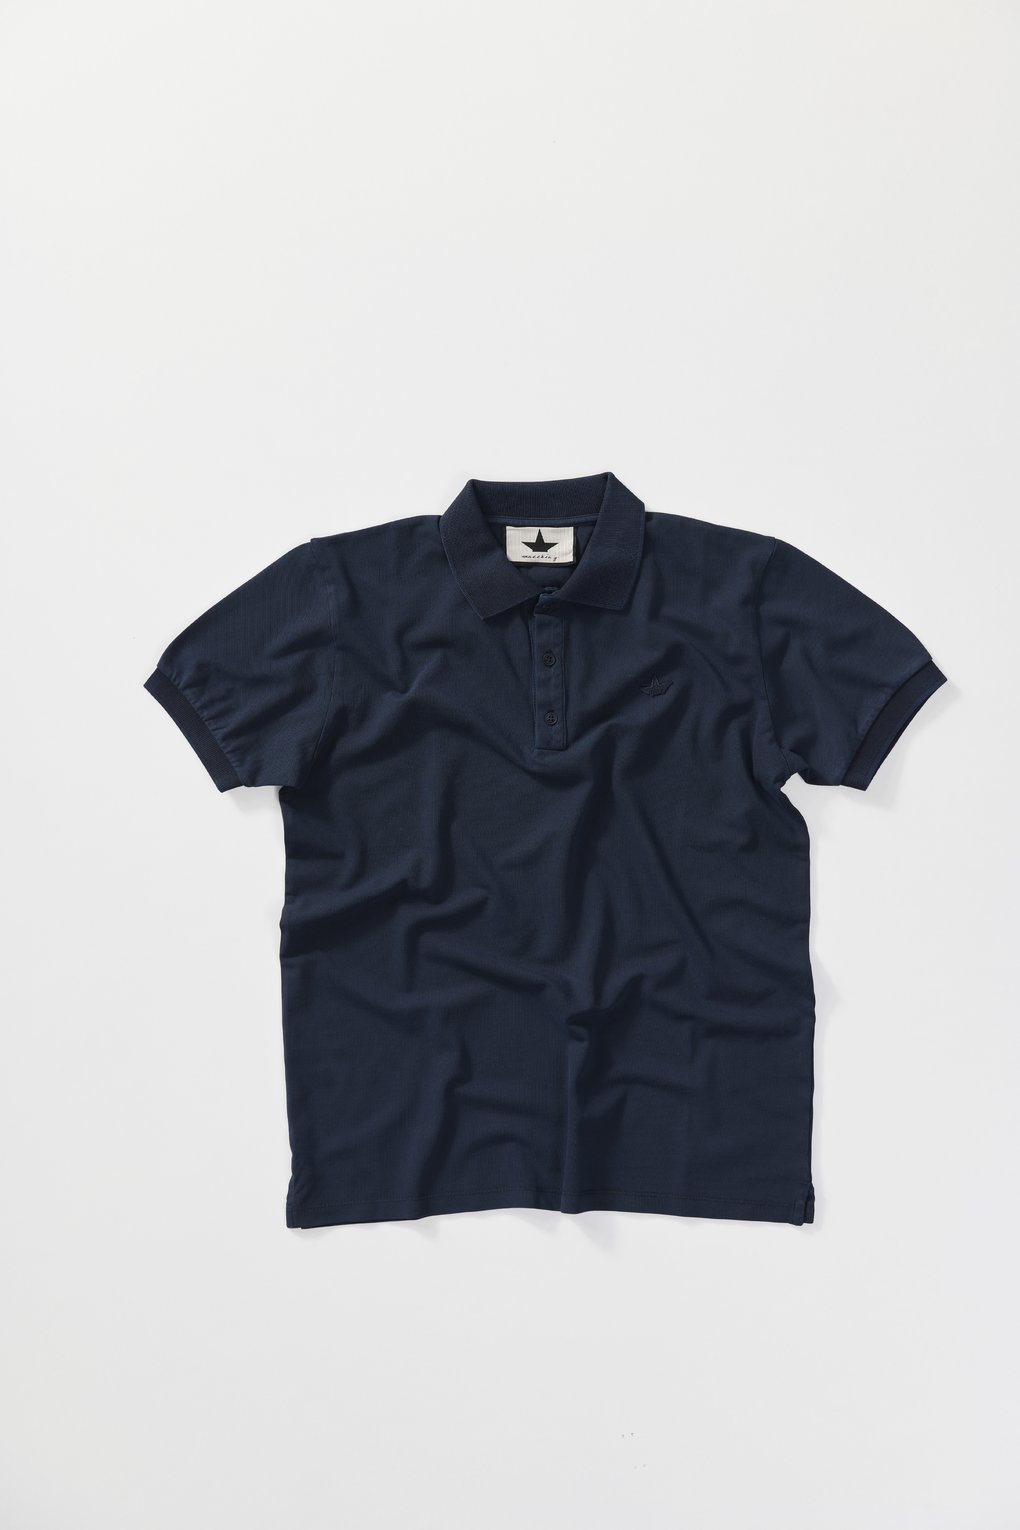 T-shirt Polo in cotton piquet, stone washed